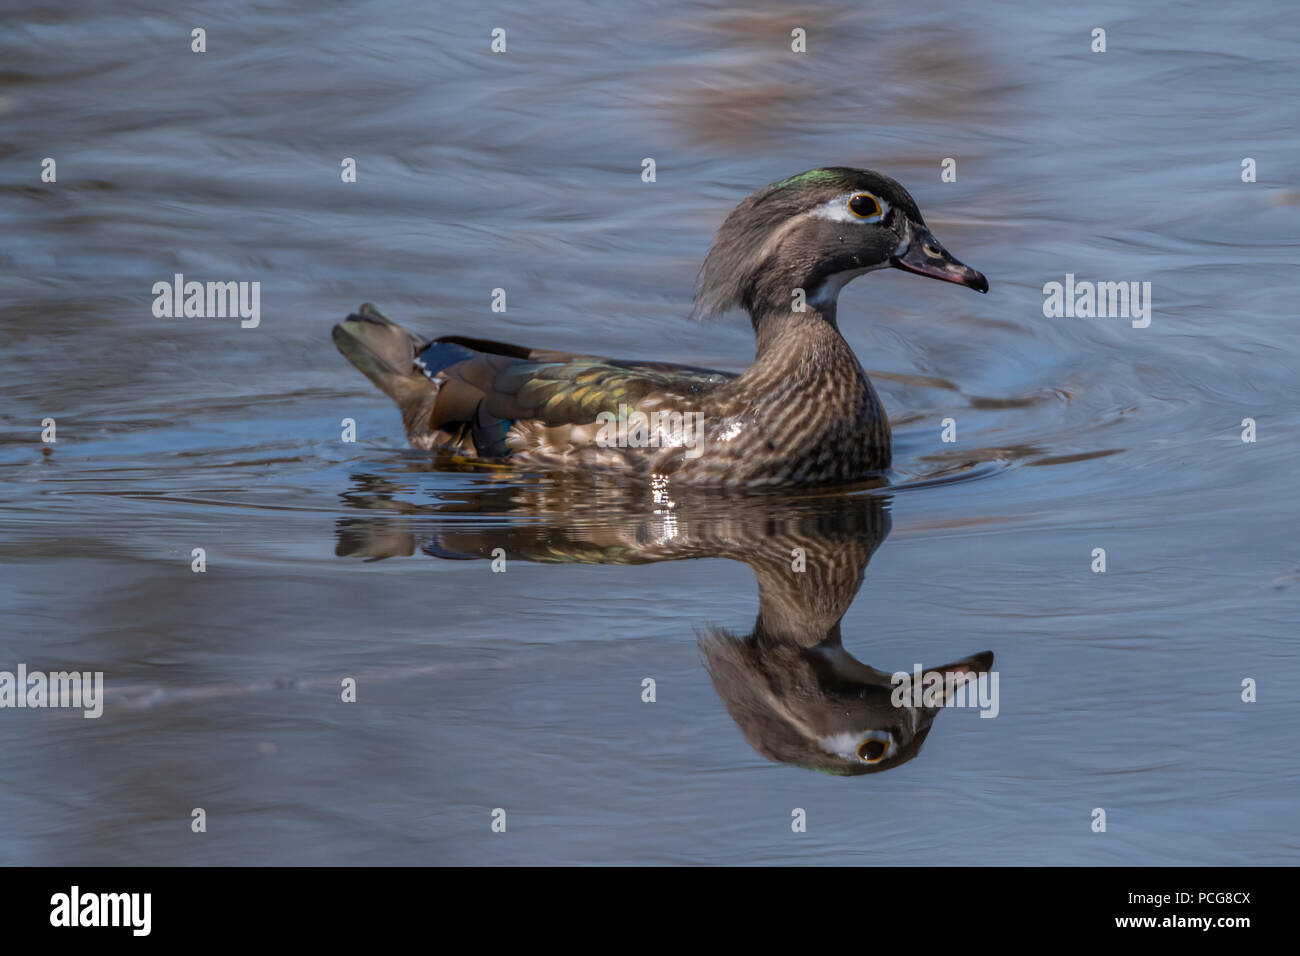 Female wood duck (Aix sponsa) swimming reflected in the water. Stock Photo